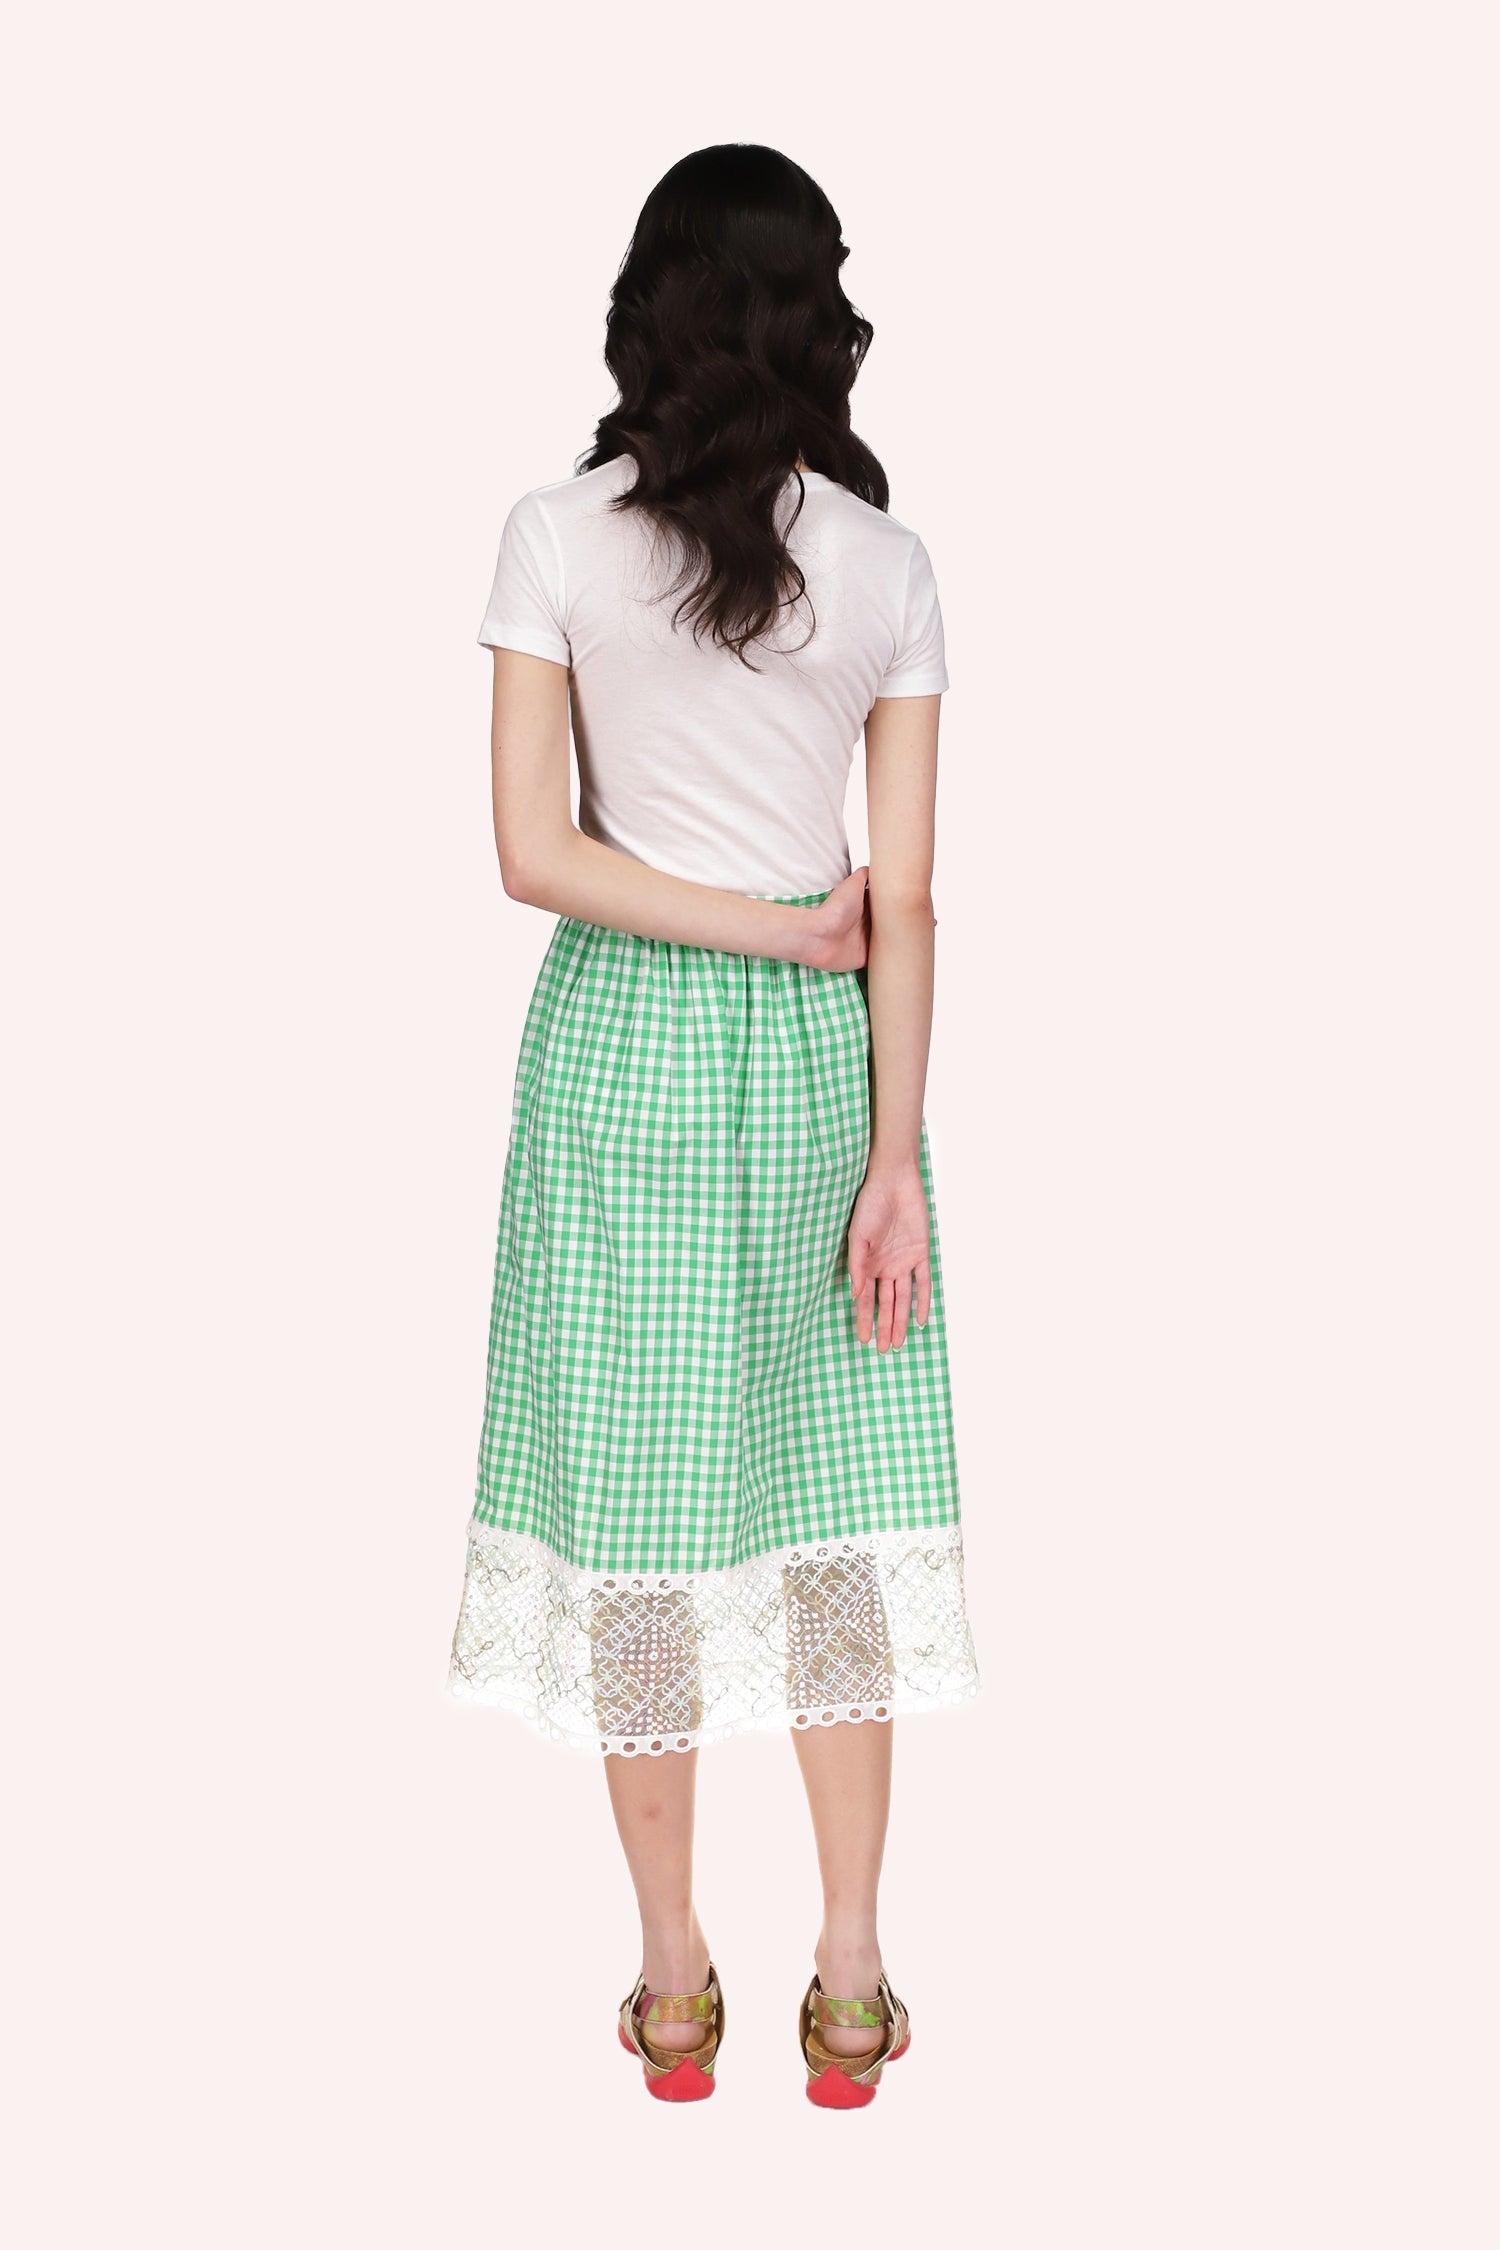 Gingham Skirt fit at the top & larger from waist down, large see-thru lace at bottom hem